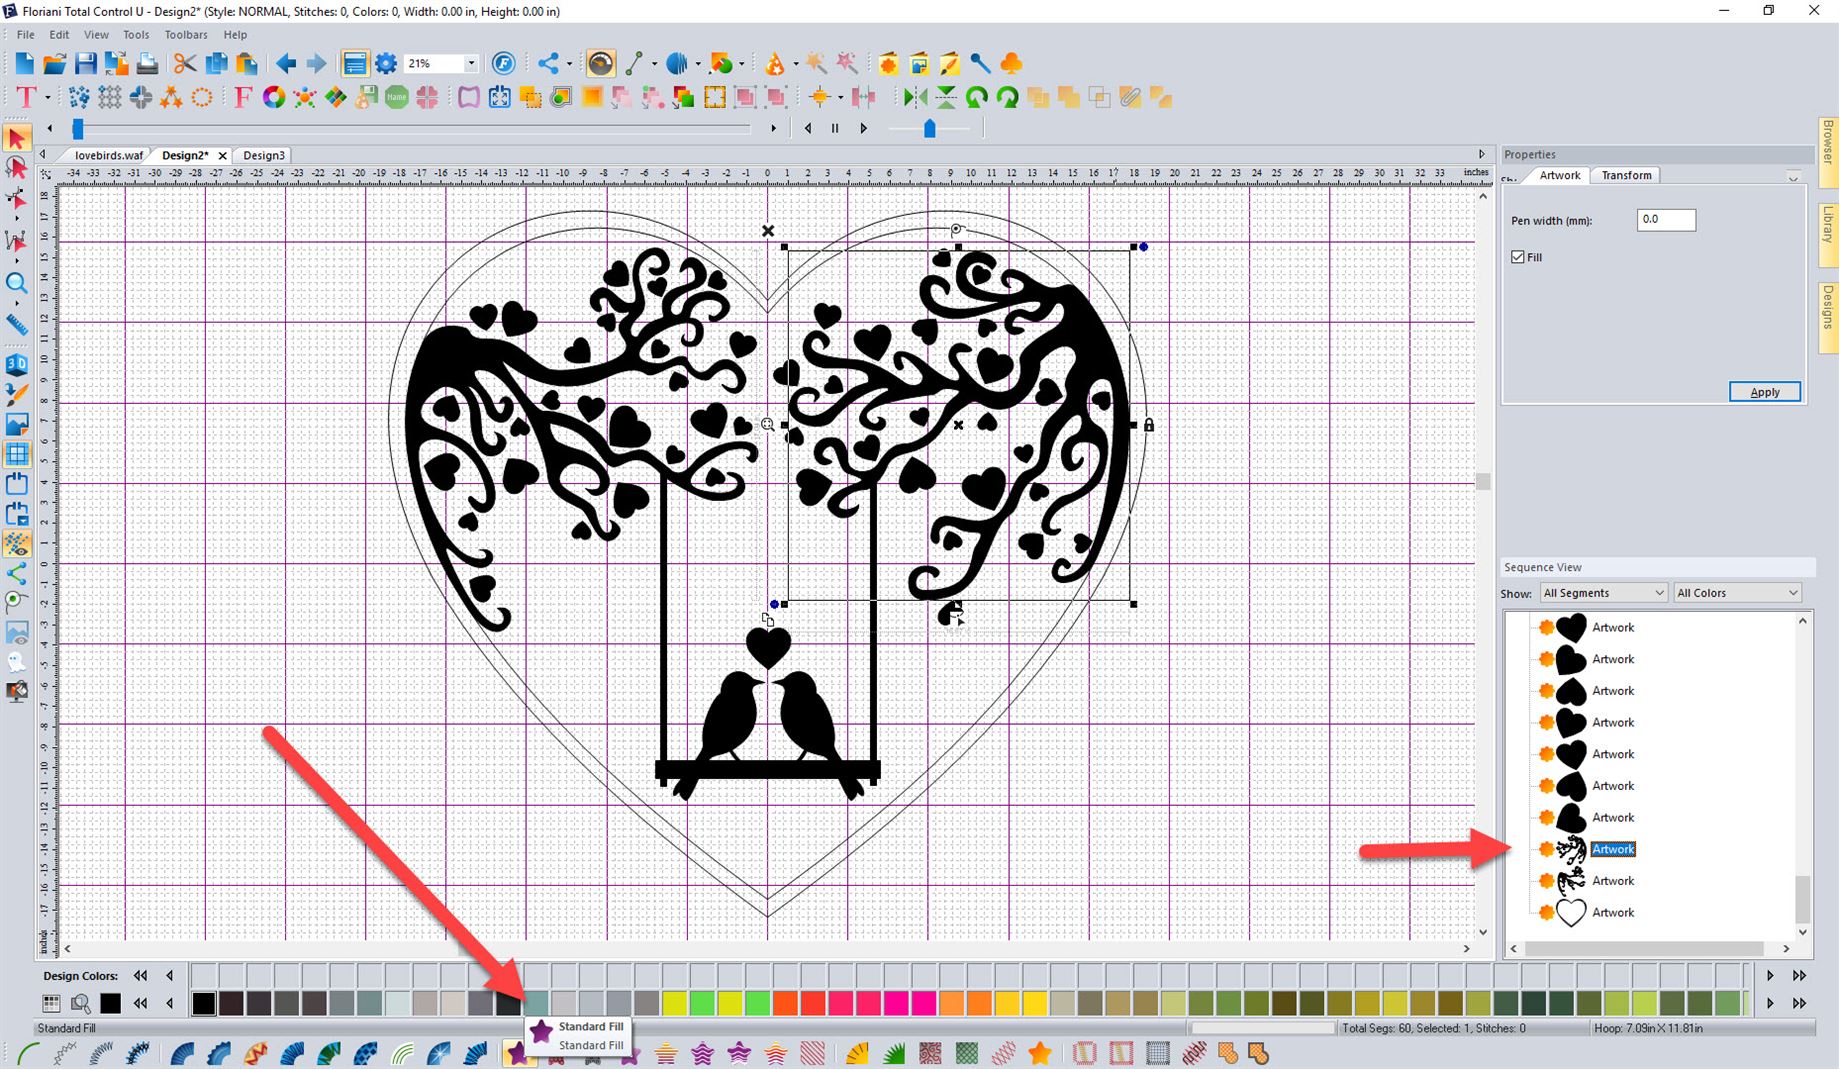 Screen shot from FTCu software of lovebirds embroidery file with branches selected to convert to fill stitch